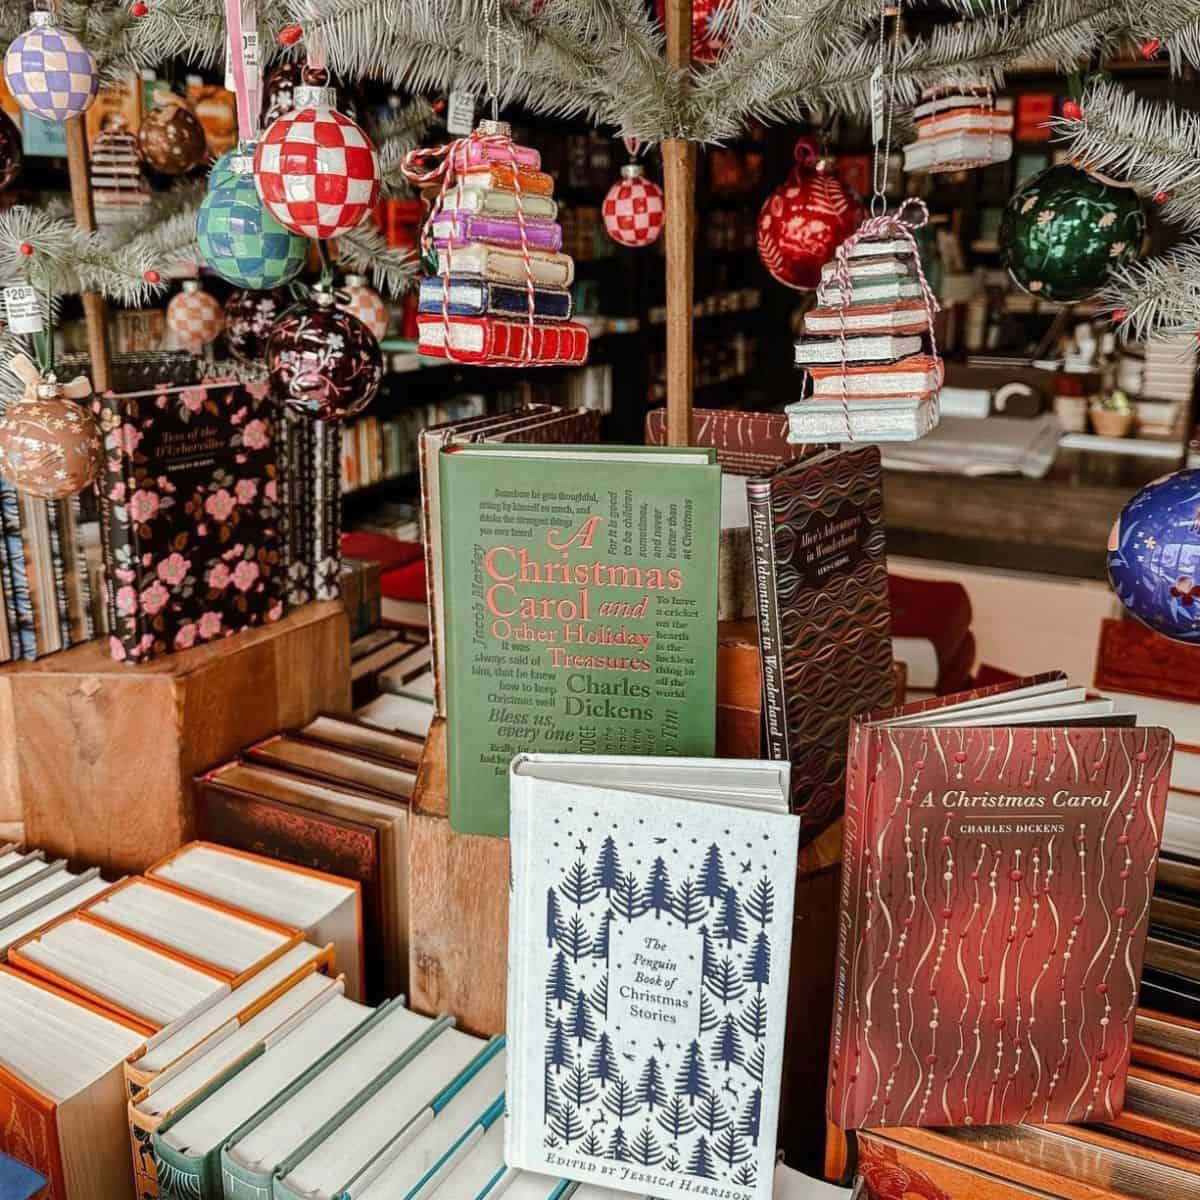 Christmas books in a bookstore with Christmas ornaments.